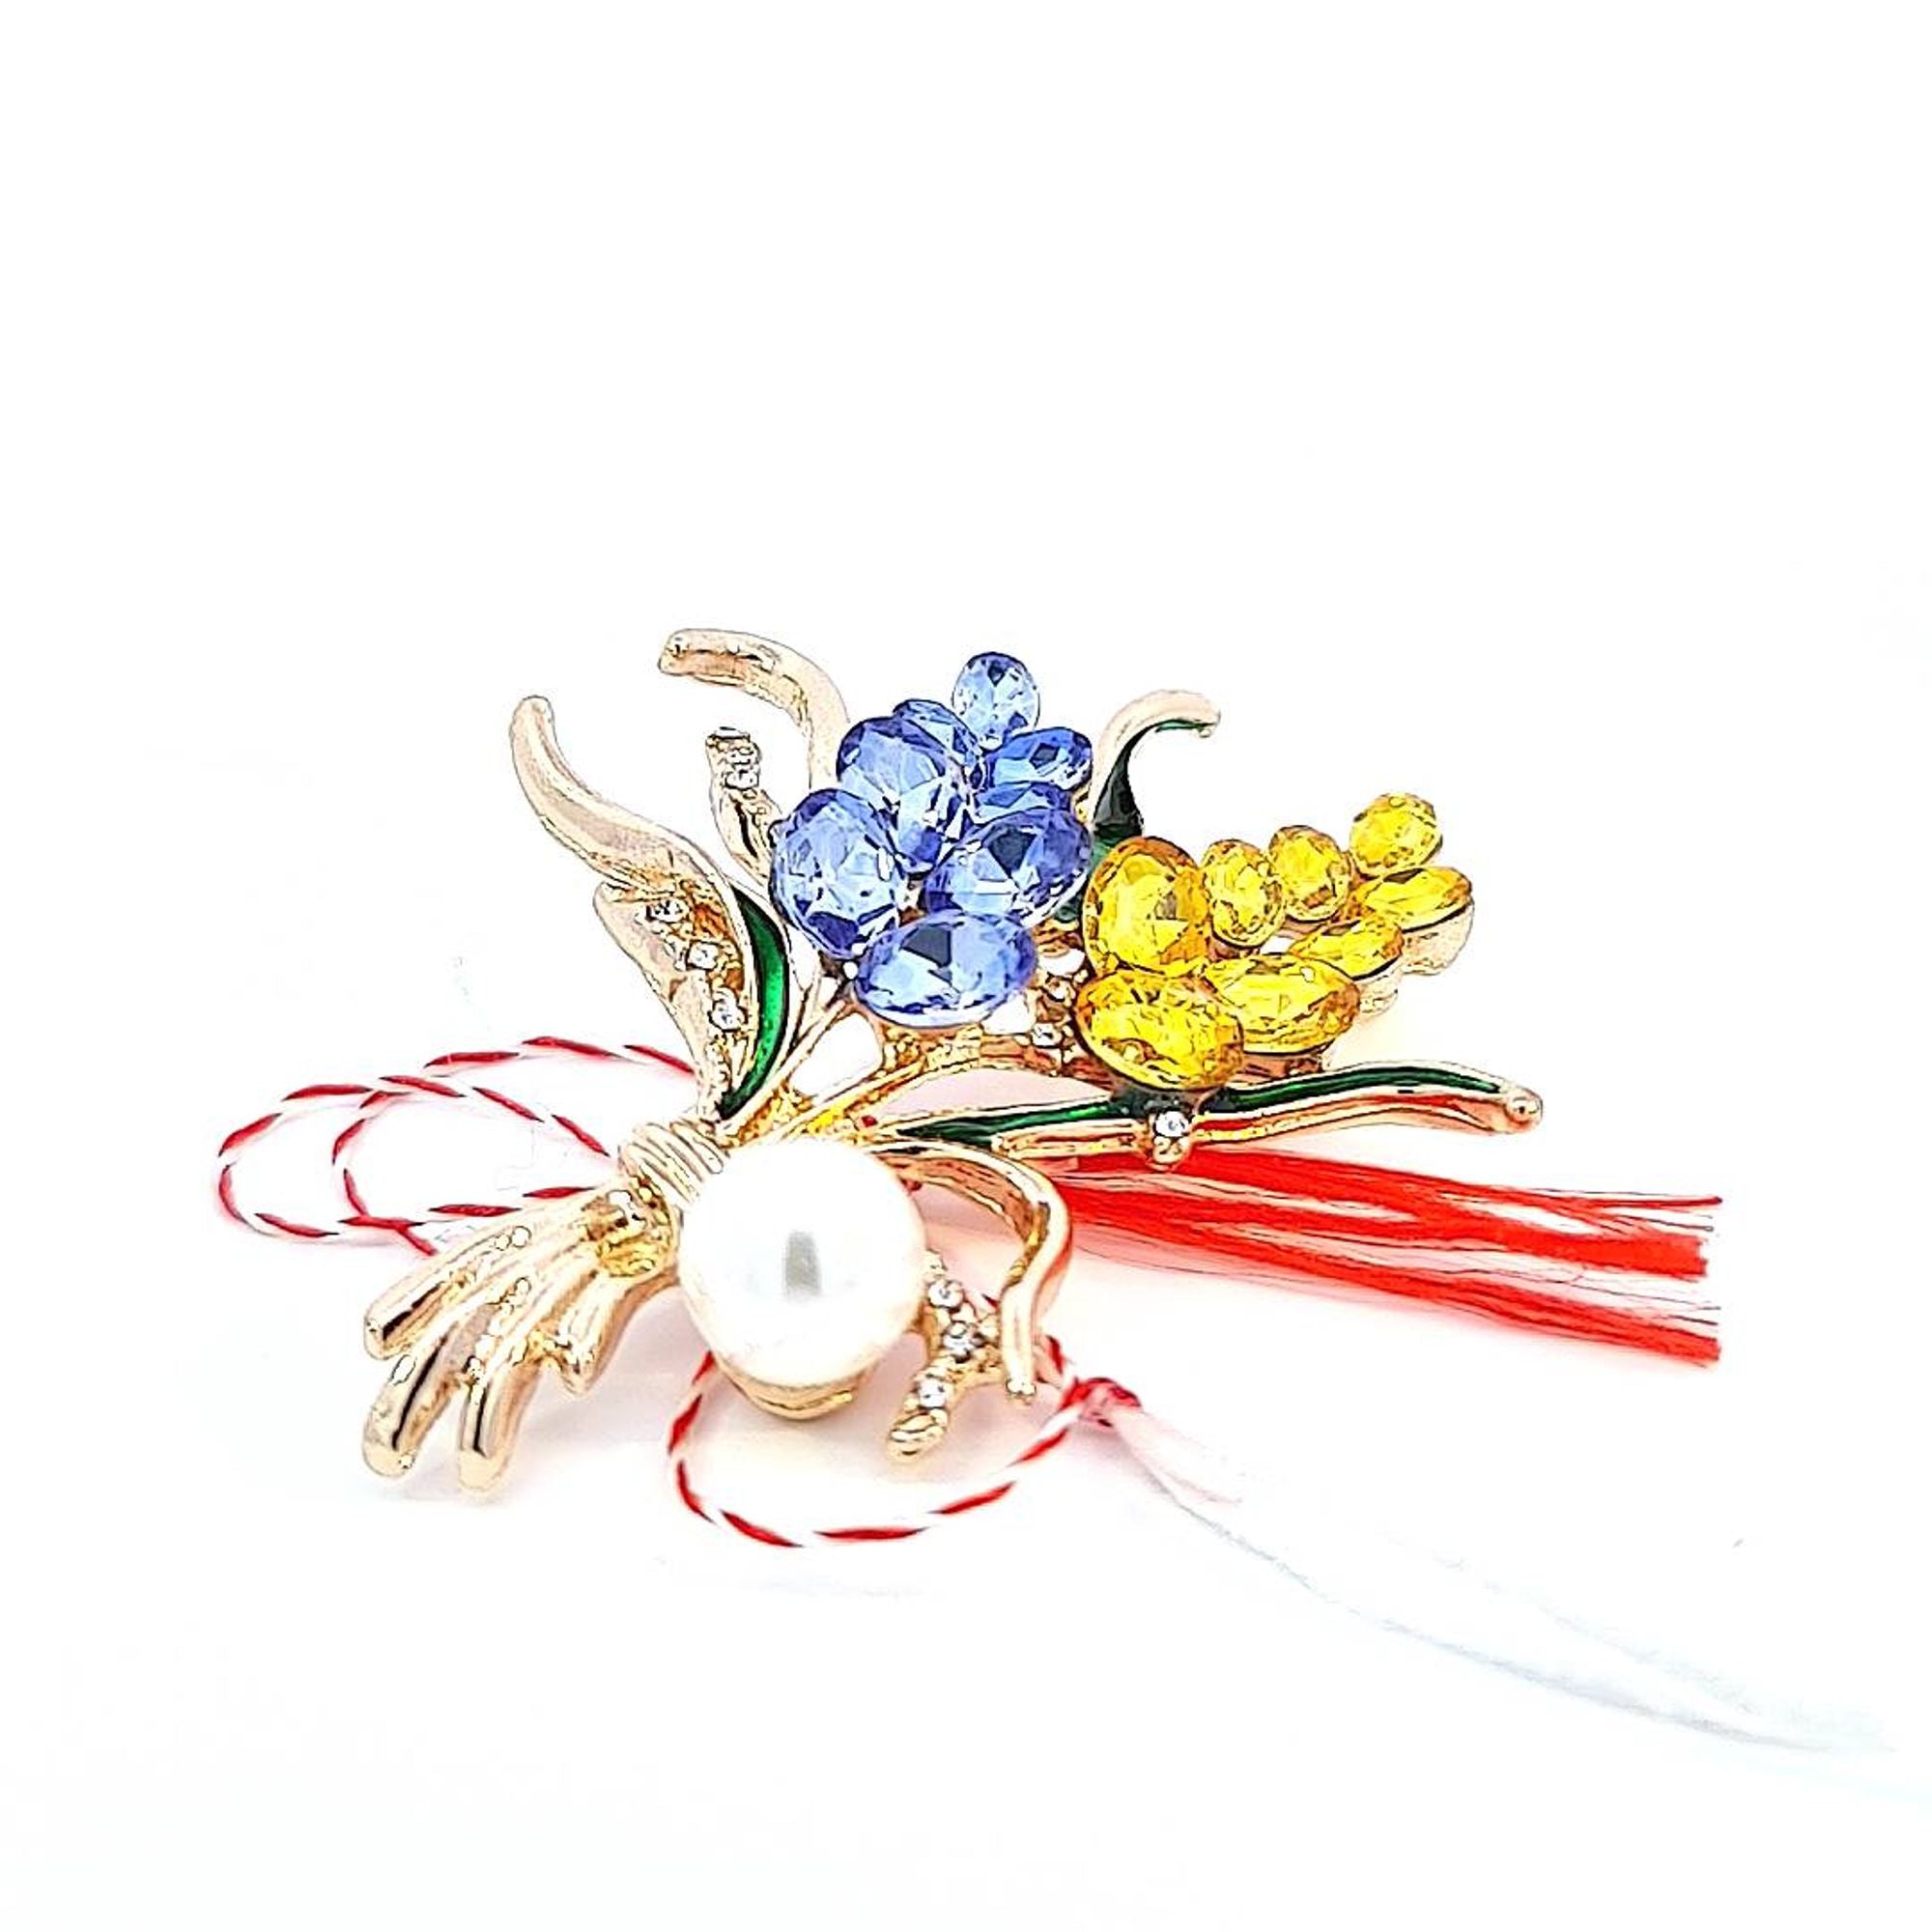 Close-up of the 'Pearlescent Harmony' Martisor brooch, displaying blue and yellow crystals with a central faux pearl.